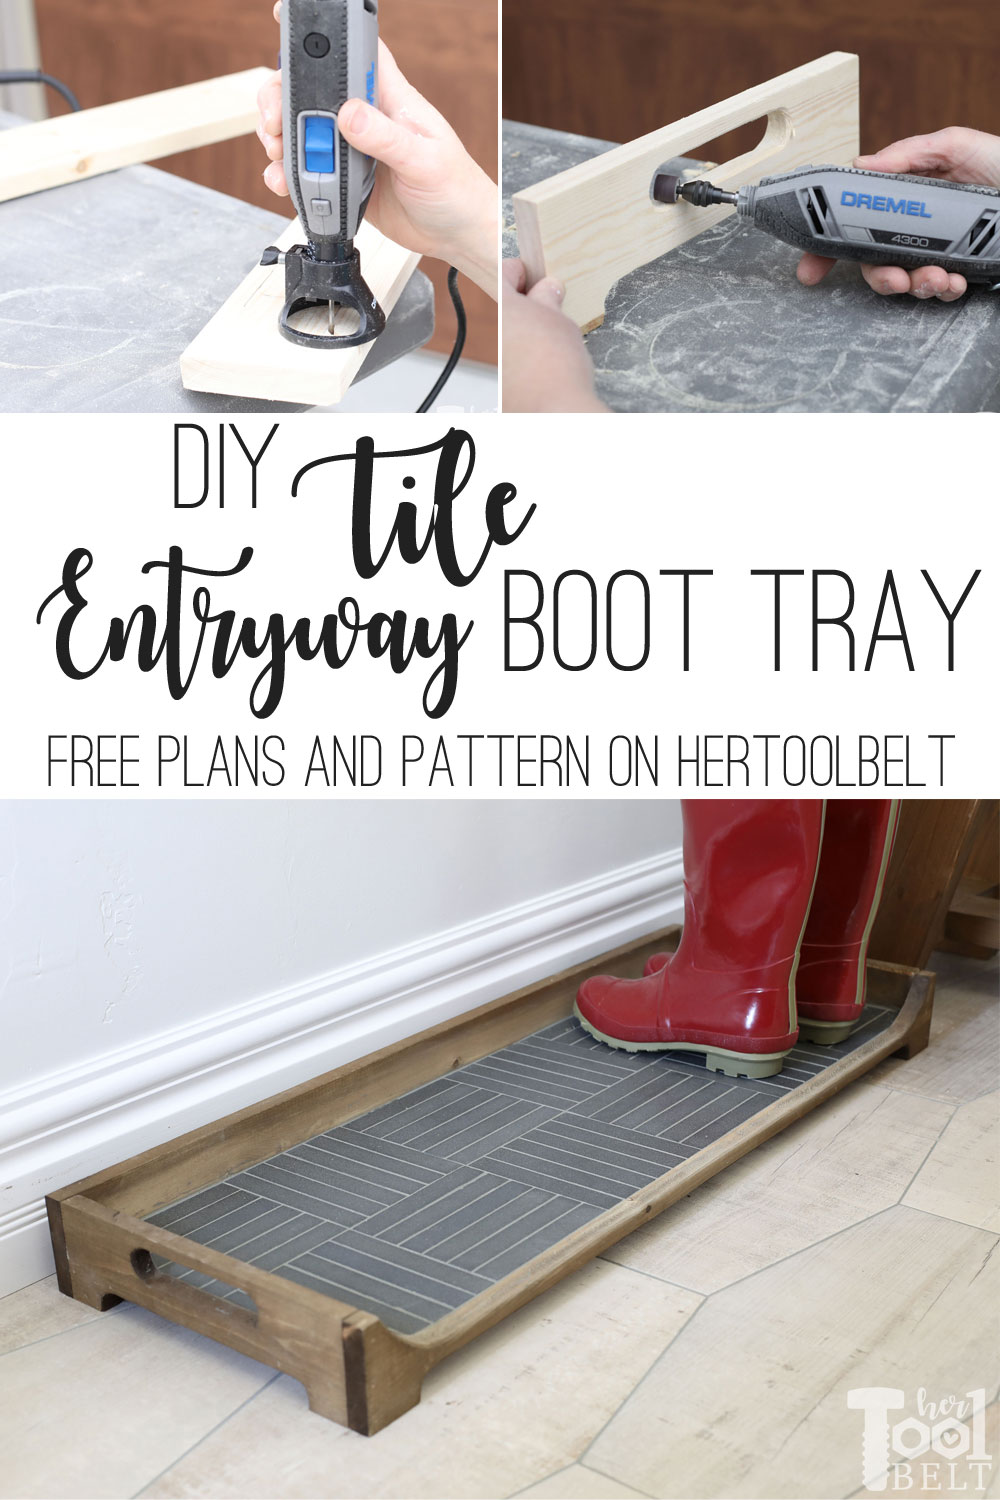 Tile Boot Tray For The Entryway Her Tool Belt